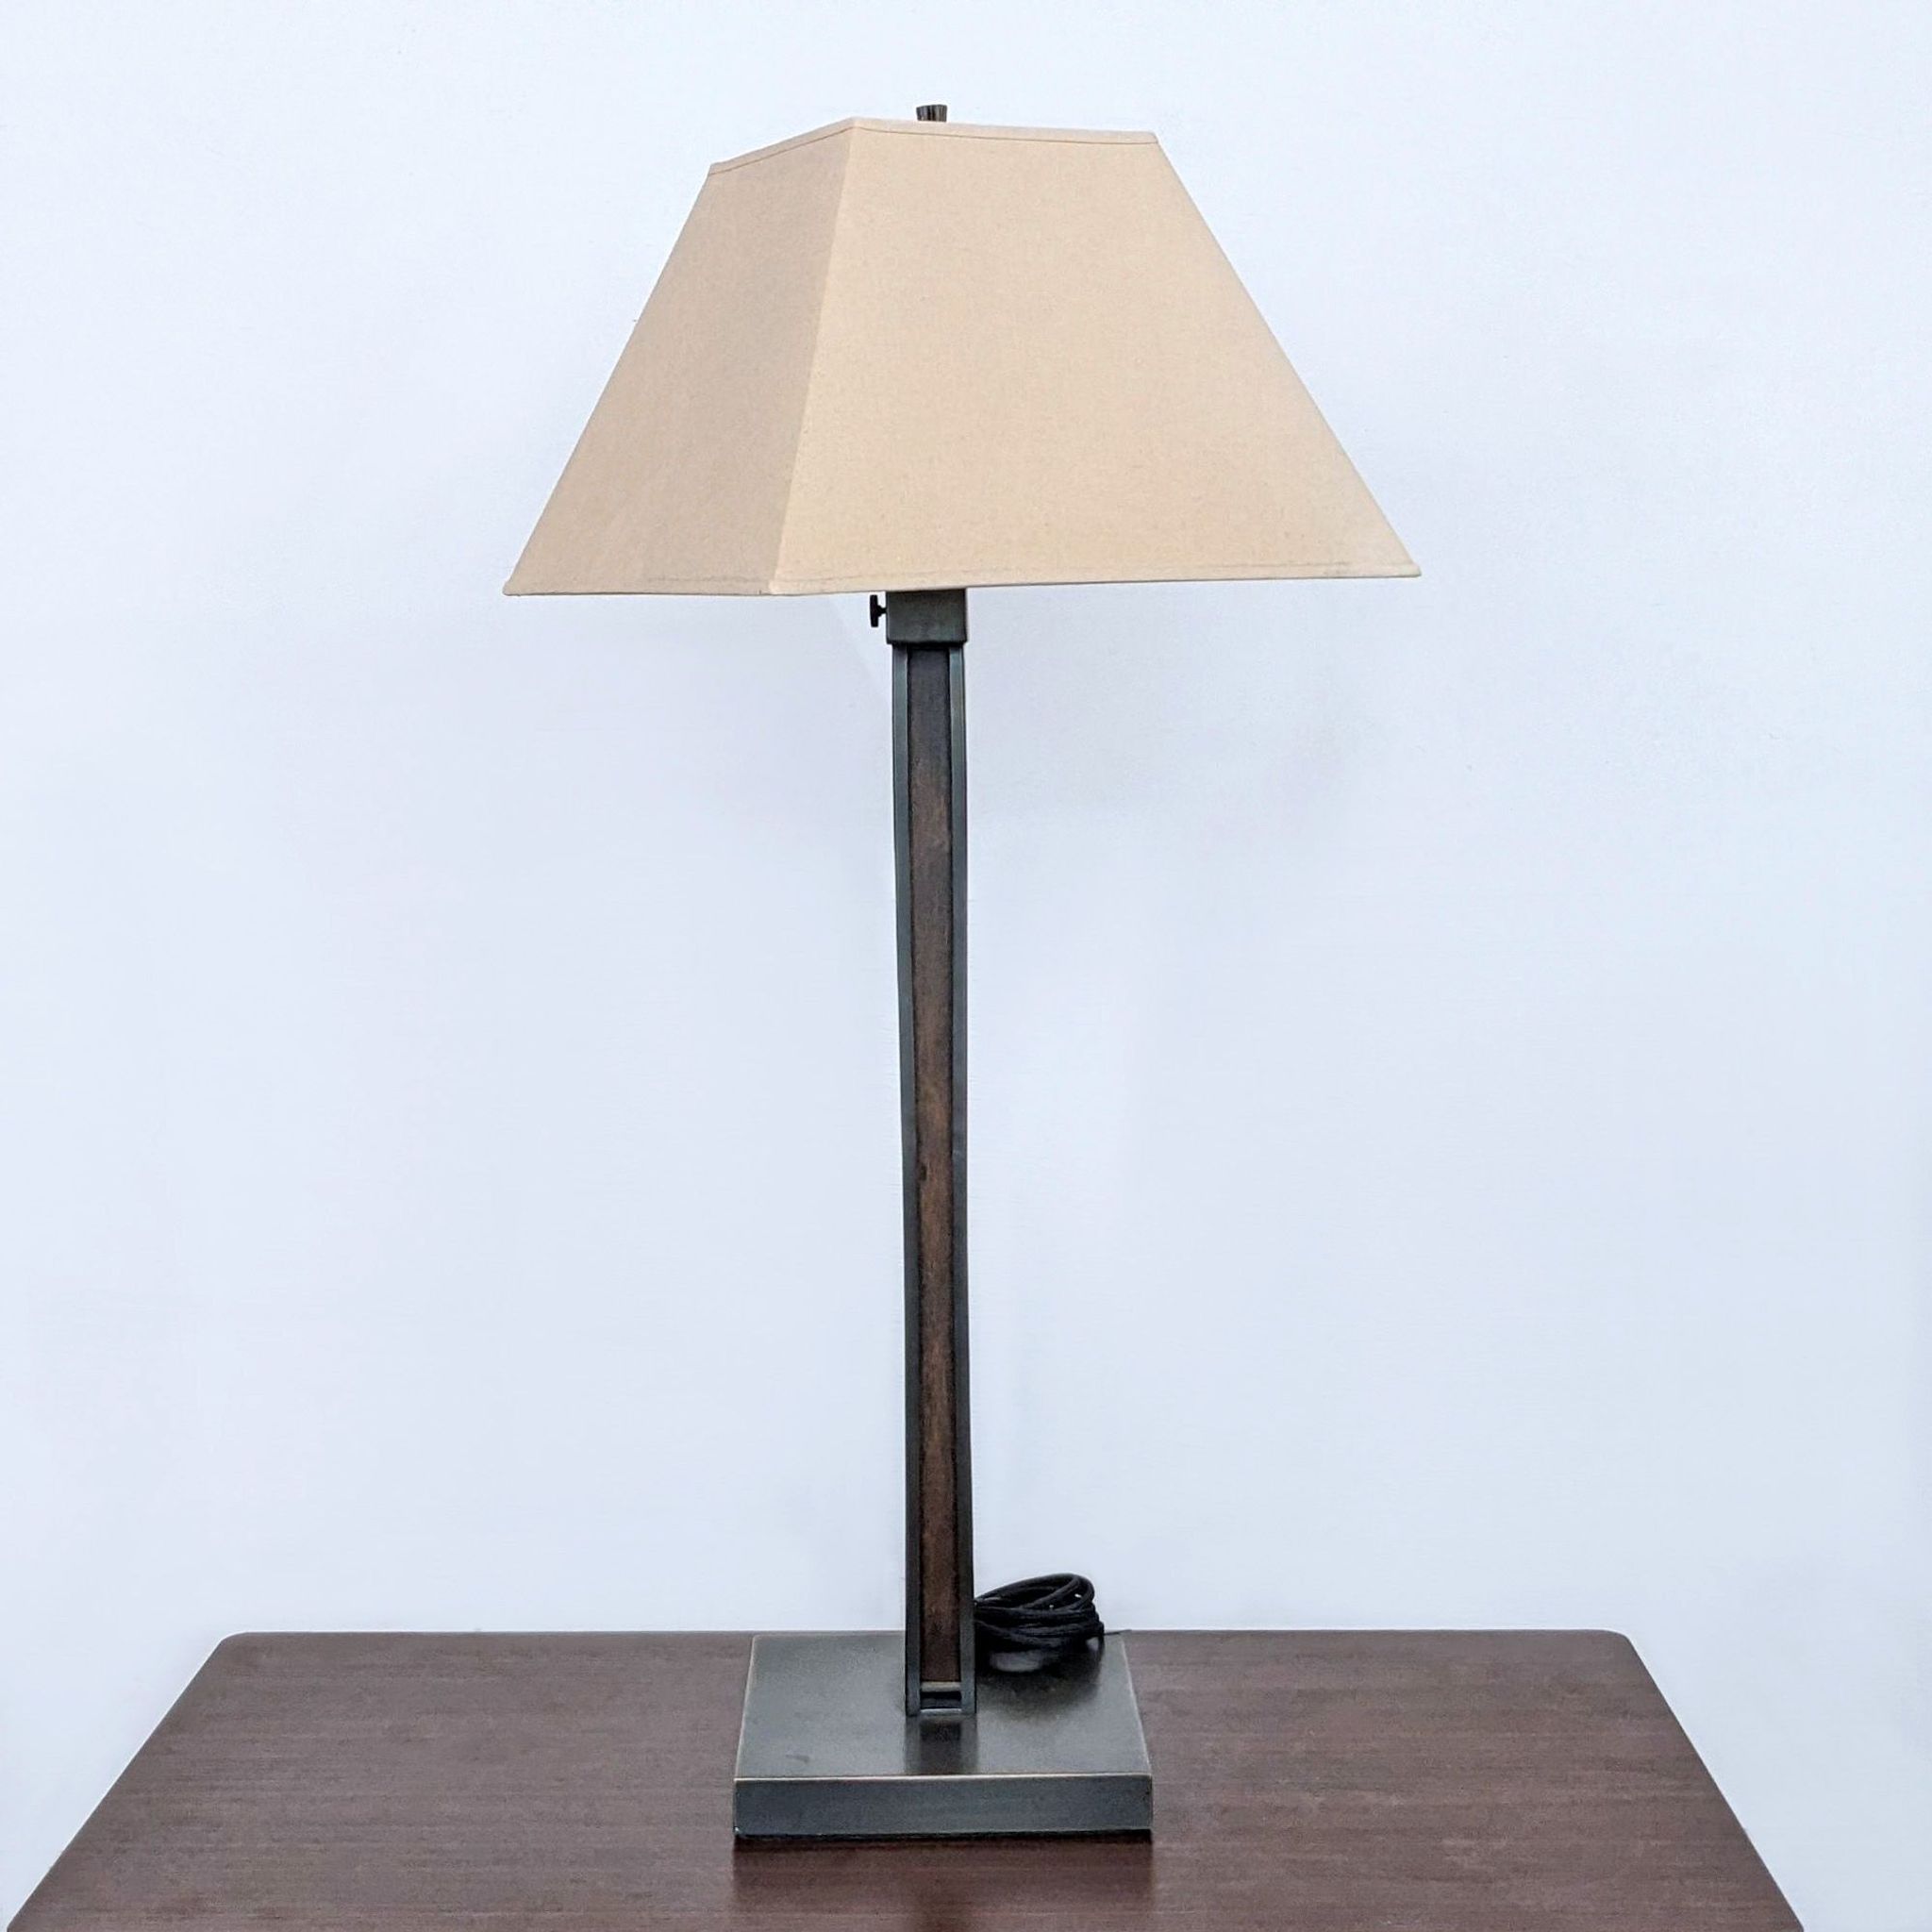 Reperch brand table lamp with a beige shade, brown stand, and square base on a wooden surface.